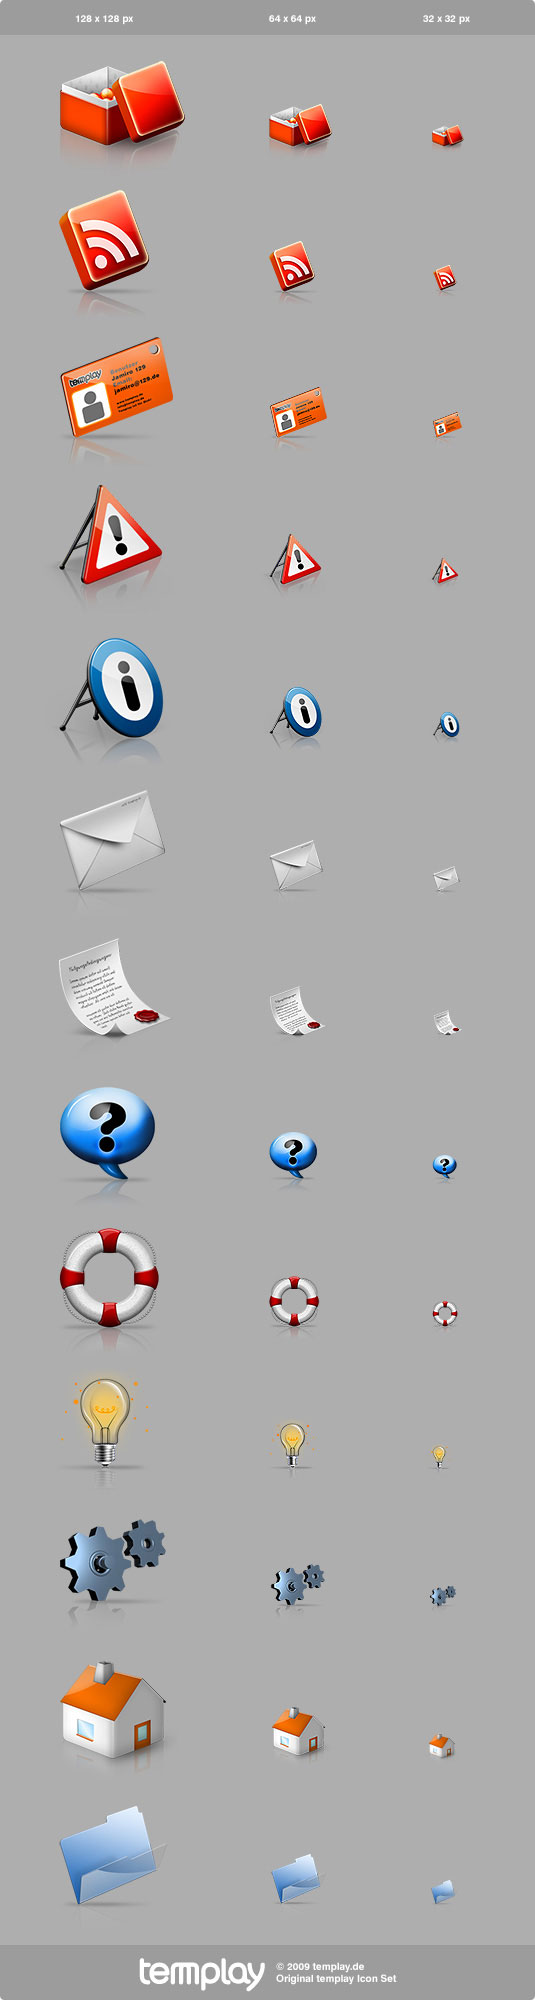 Life buoy, email, gear, passes, box png icon